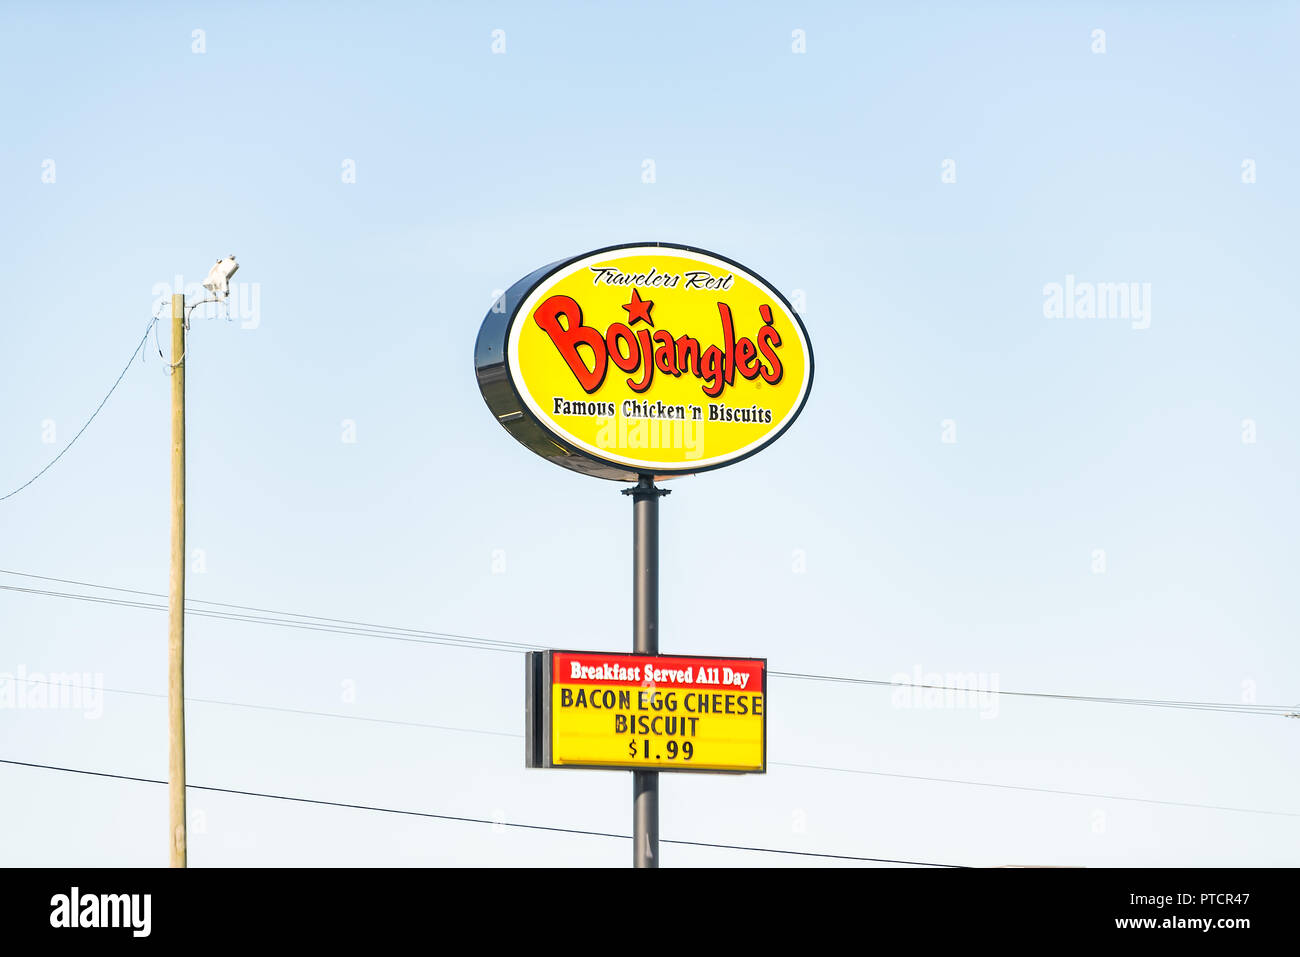 Greenville, USA - April 20, 2018: Bojangles large colorful sign on highway road isolated against blue sky fast food fried chicken and biscuits breakfa Stock Photo